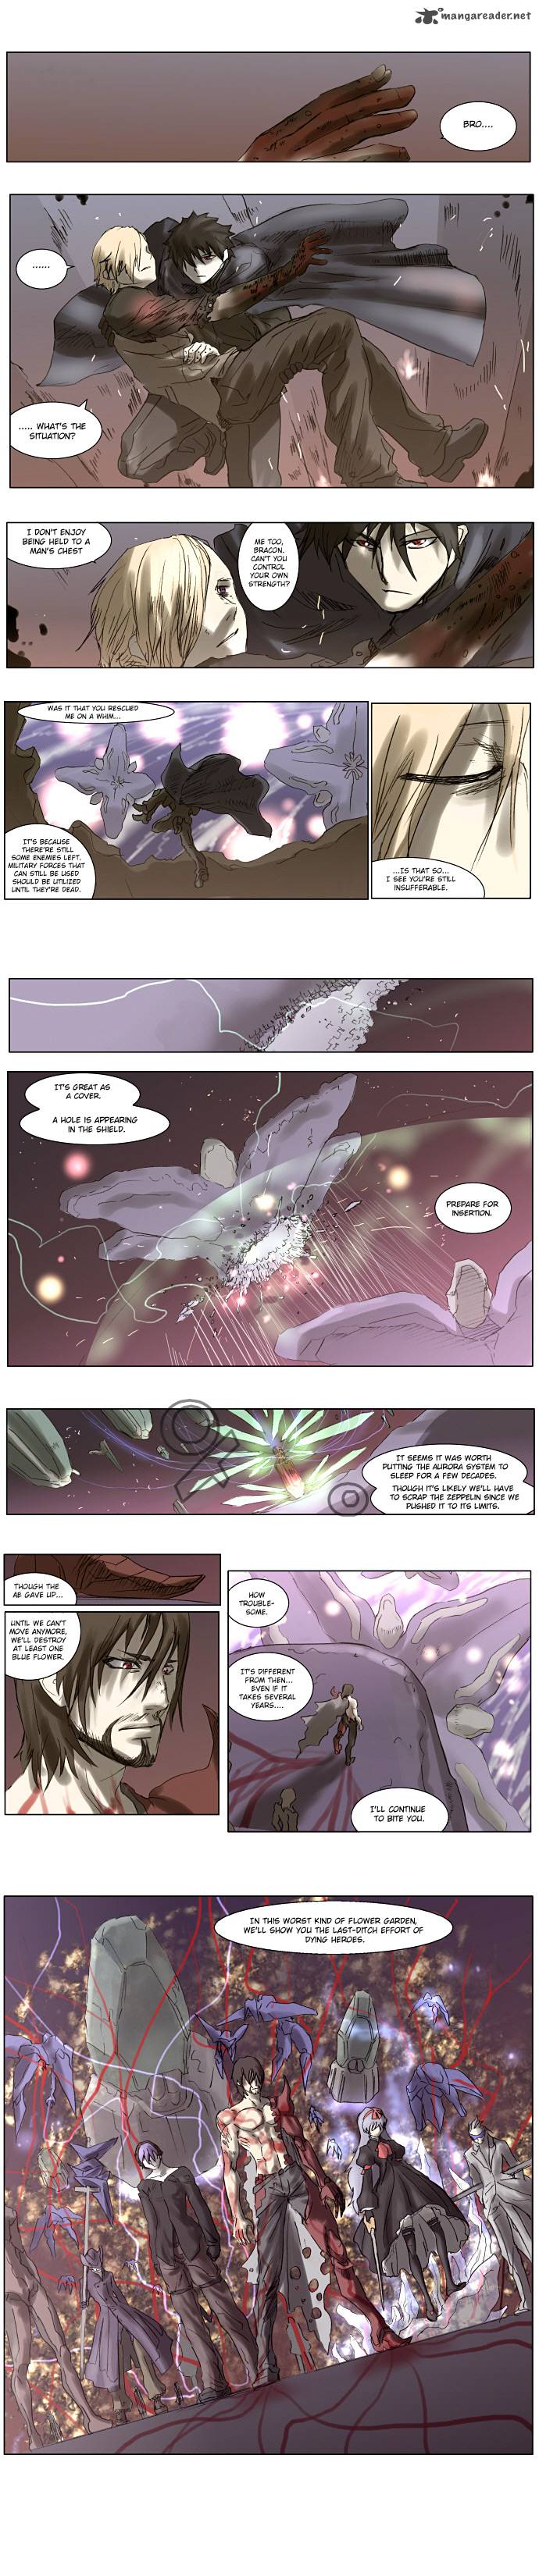 Knight Run Chapter 75 Page 7